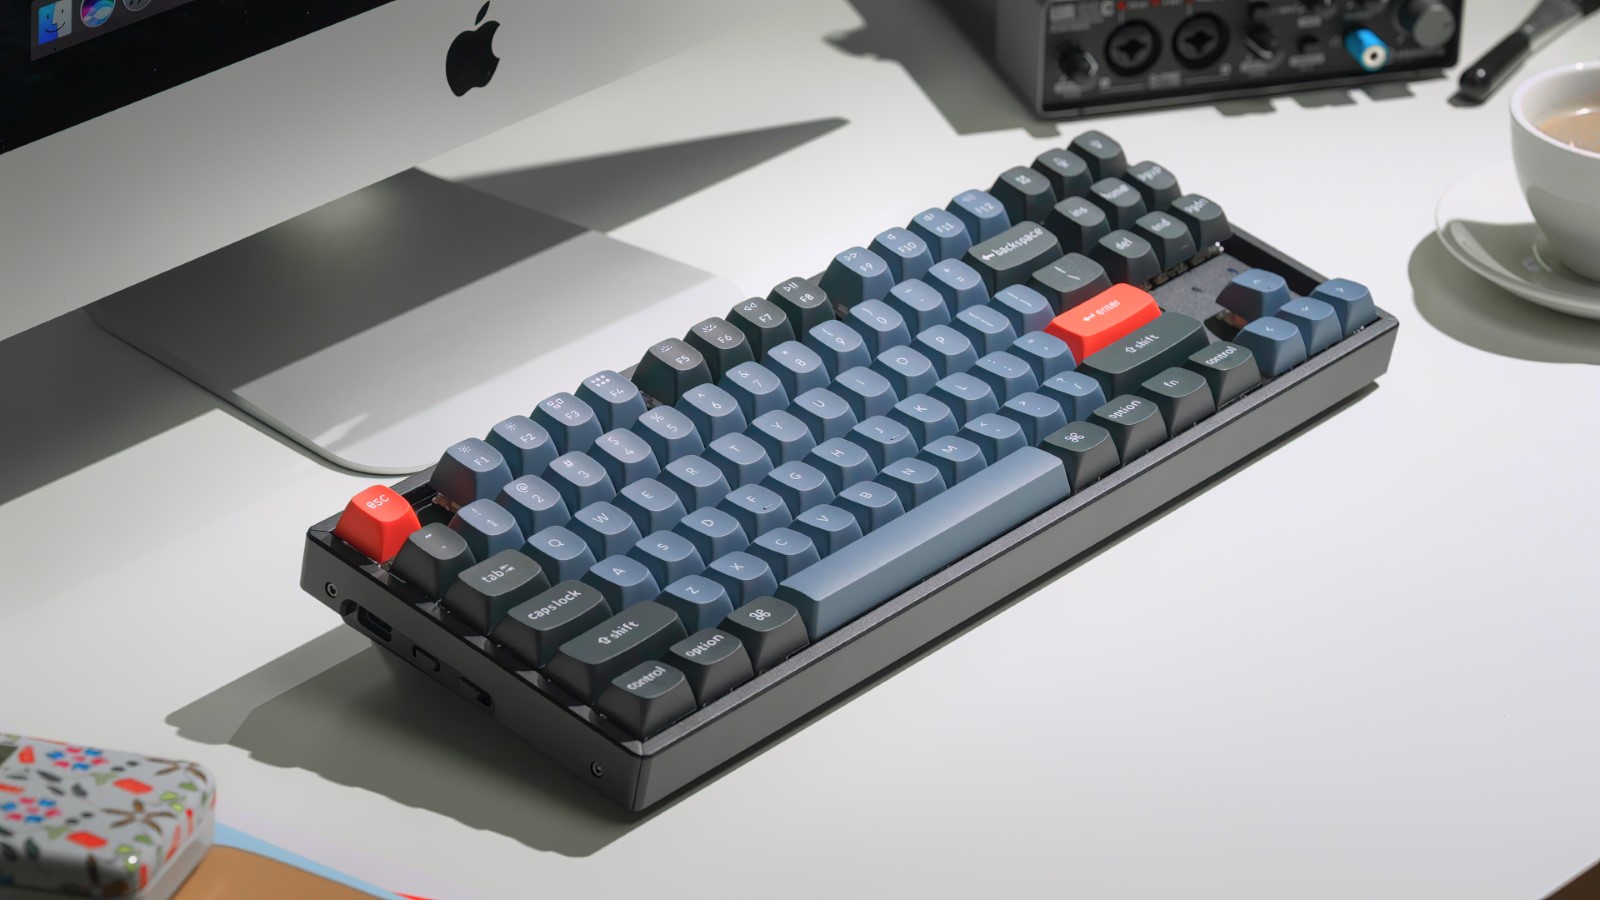 Keychron K8 Pro mechanical keyboard review: An affordable trip back to the  Mac future